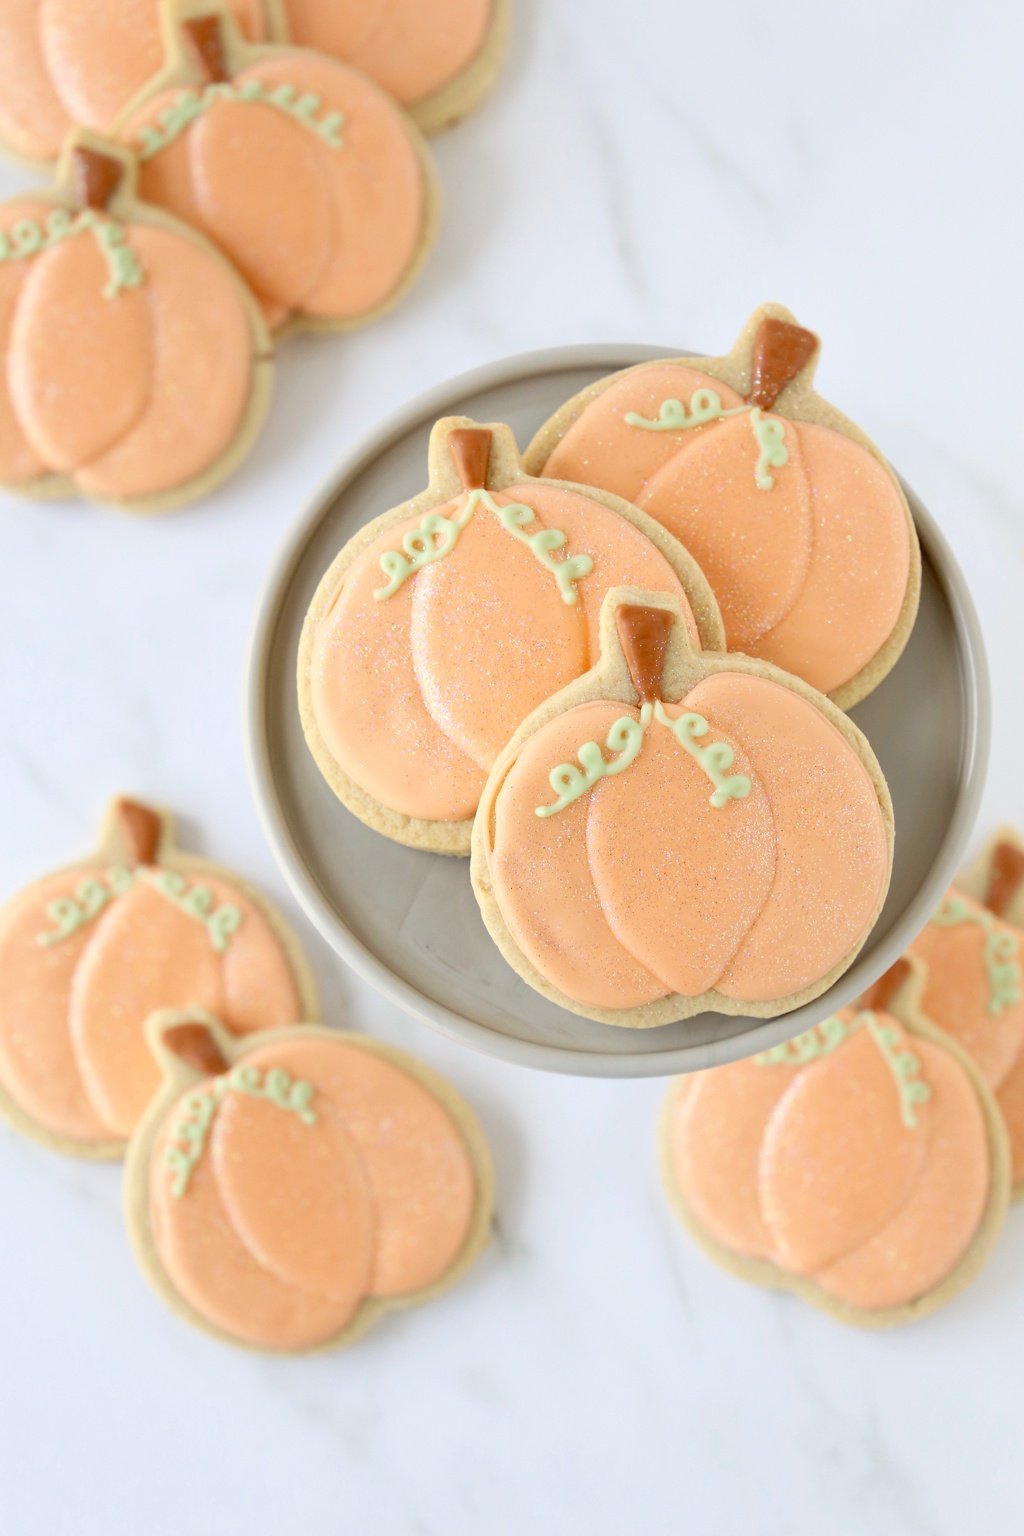 A close up of 3 spiced shortbread cookies, decorated to look like pumpkins